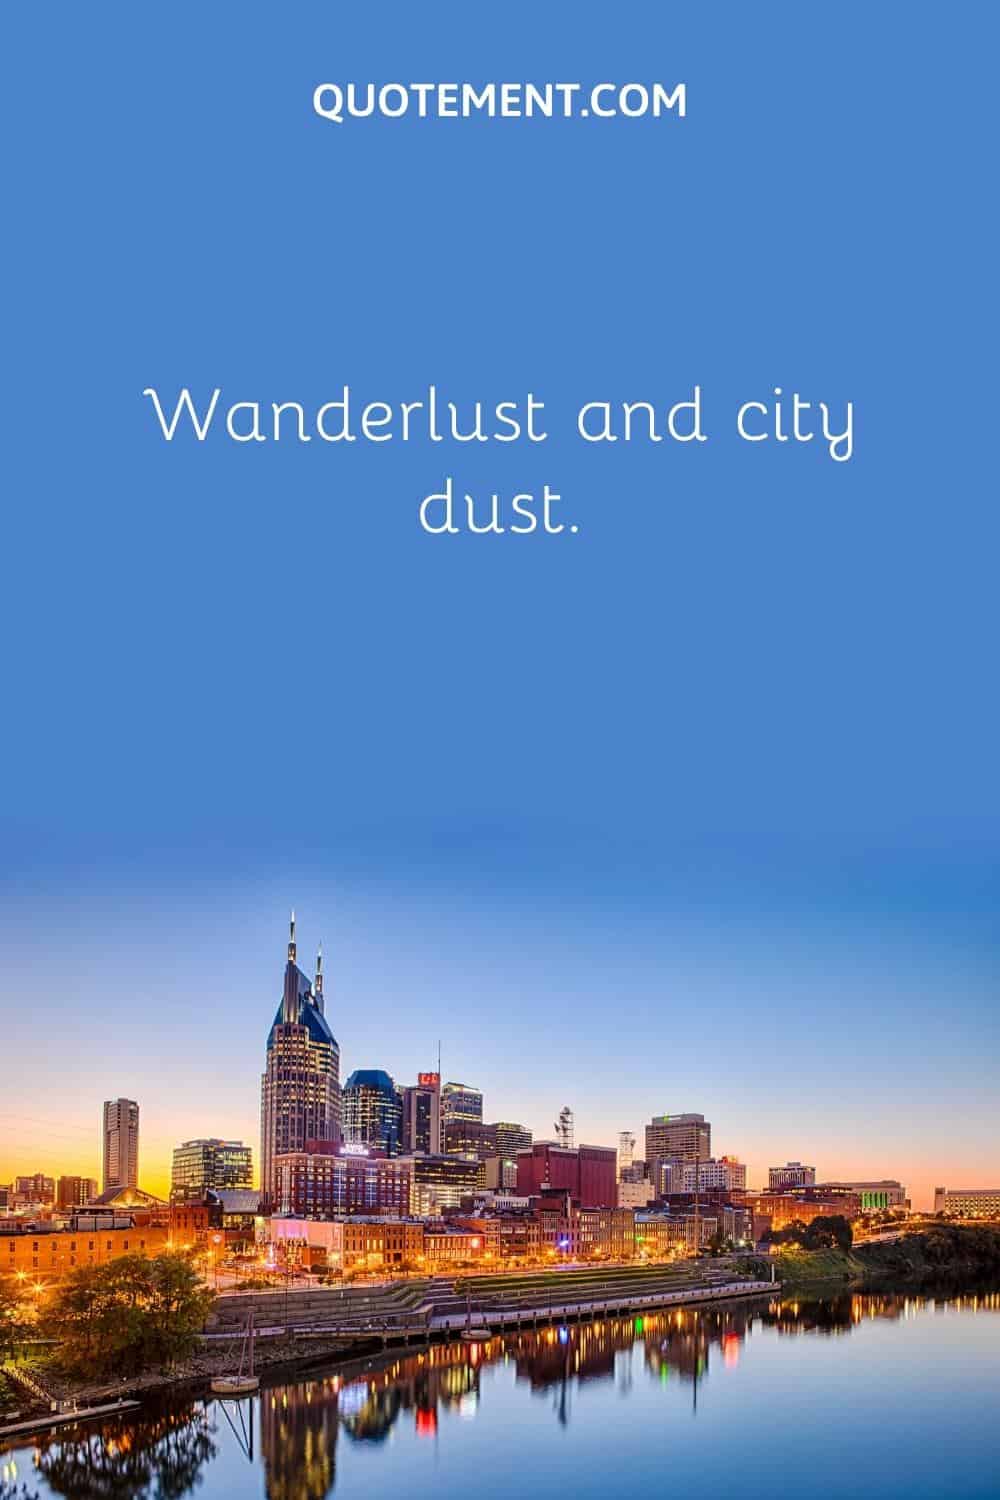 Wanderlust and city dust.